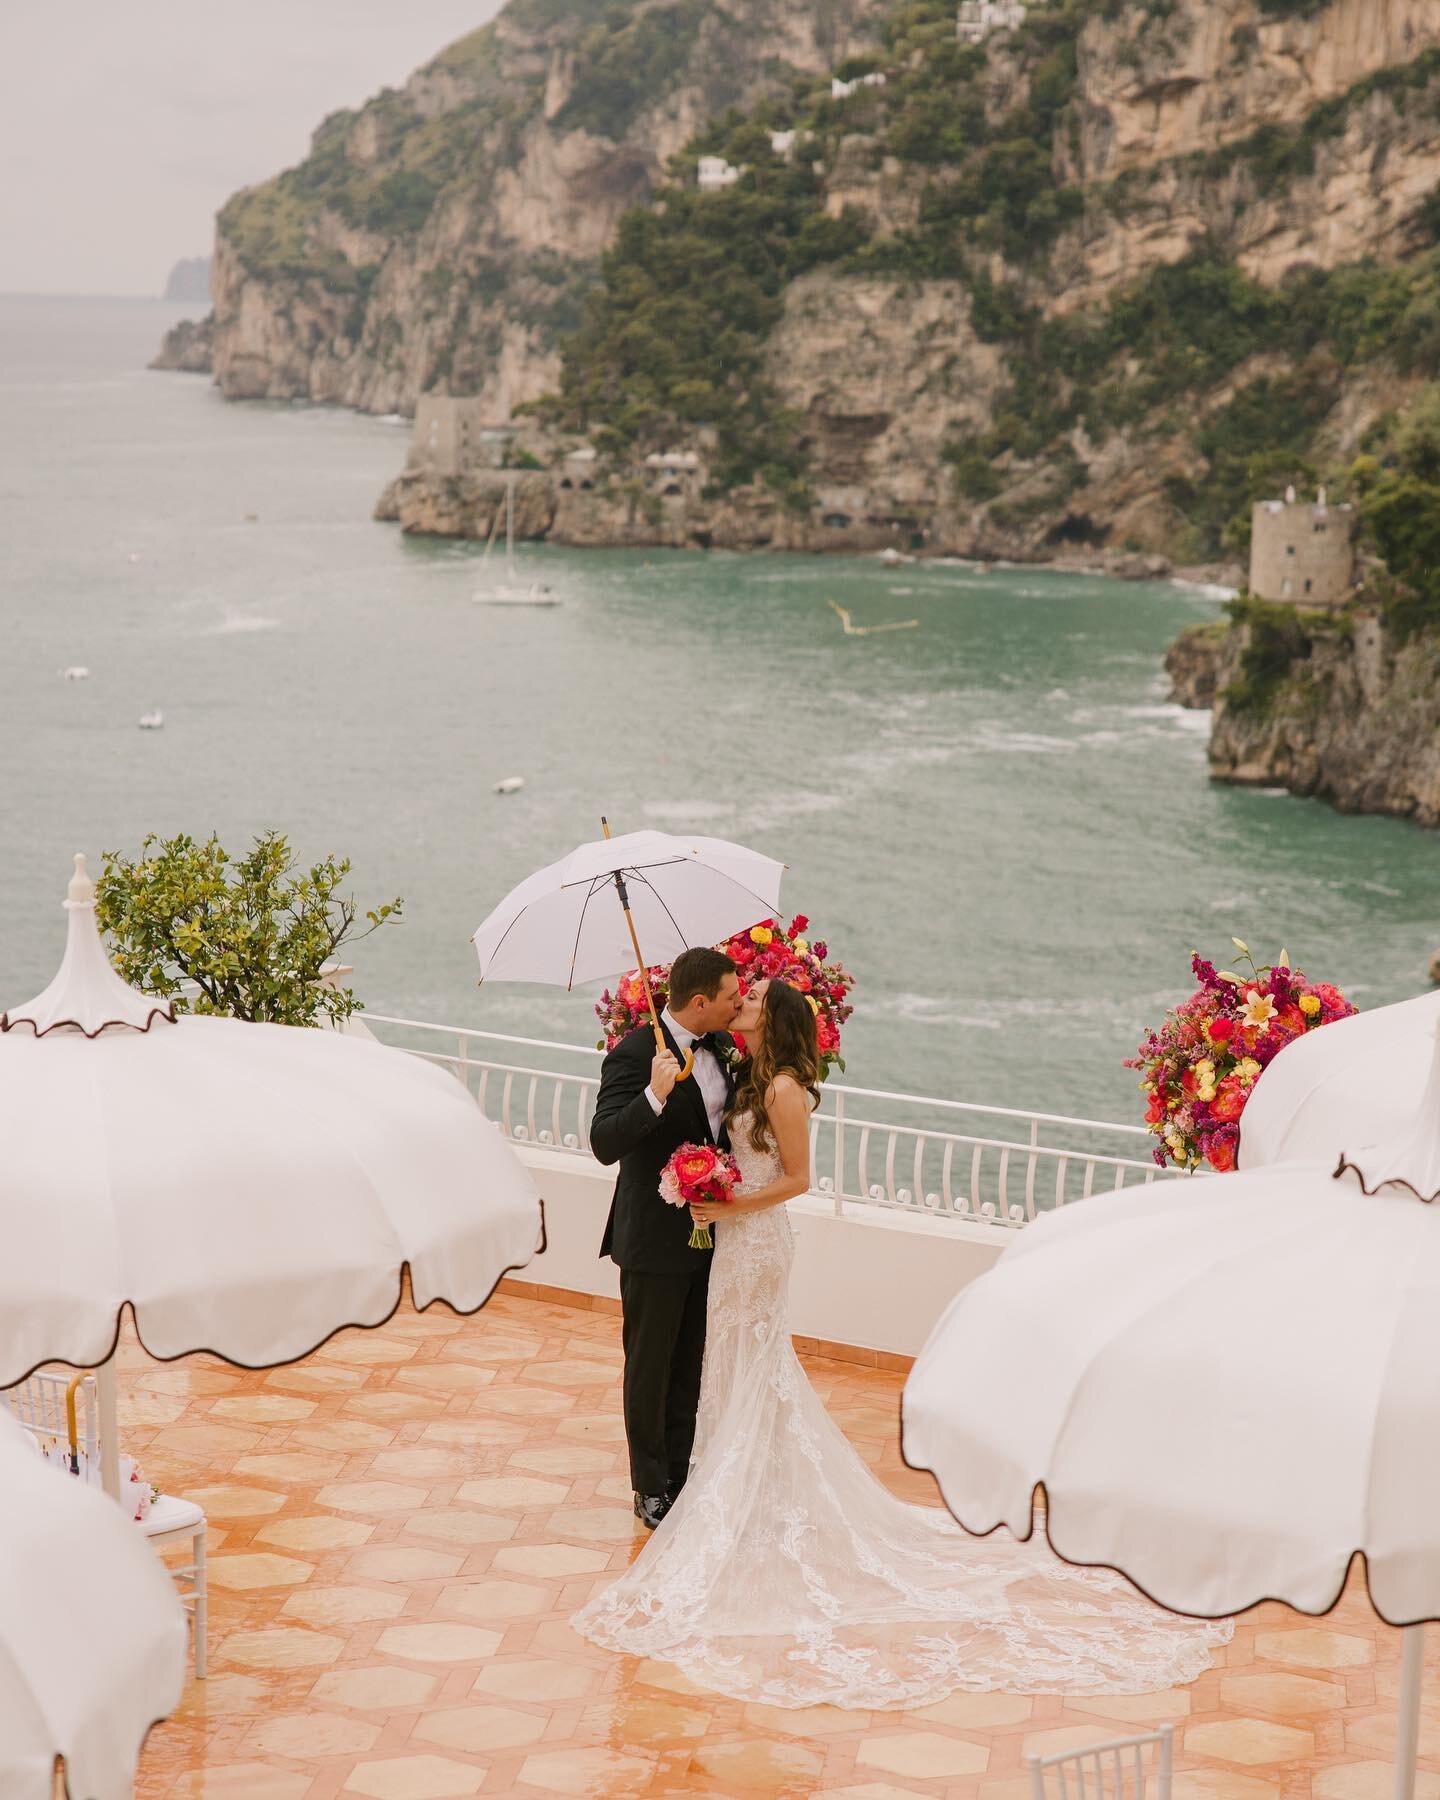 Kevin &amp; Morgan🤍 

Thank you for bringing us along to the dreamiest place on earth to celebrate your love🥰🌸🇮🇹 

#tampaweddingphotographer #positanowedding #positanoweddingphotographer #amalficoastwedding #italianweddingphotographer #tuscanywe